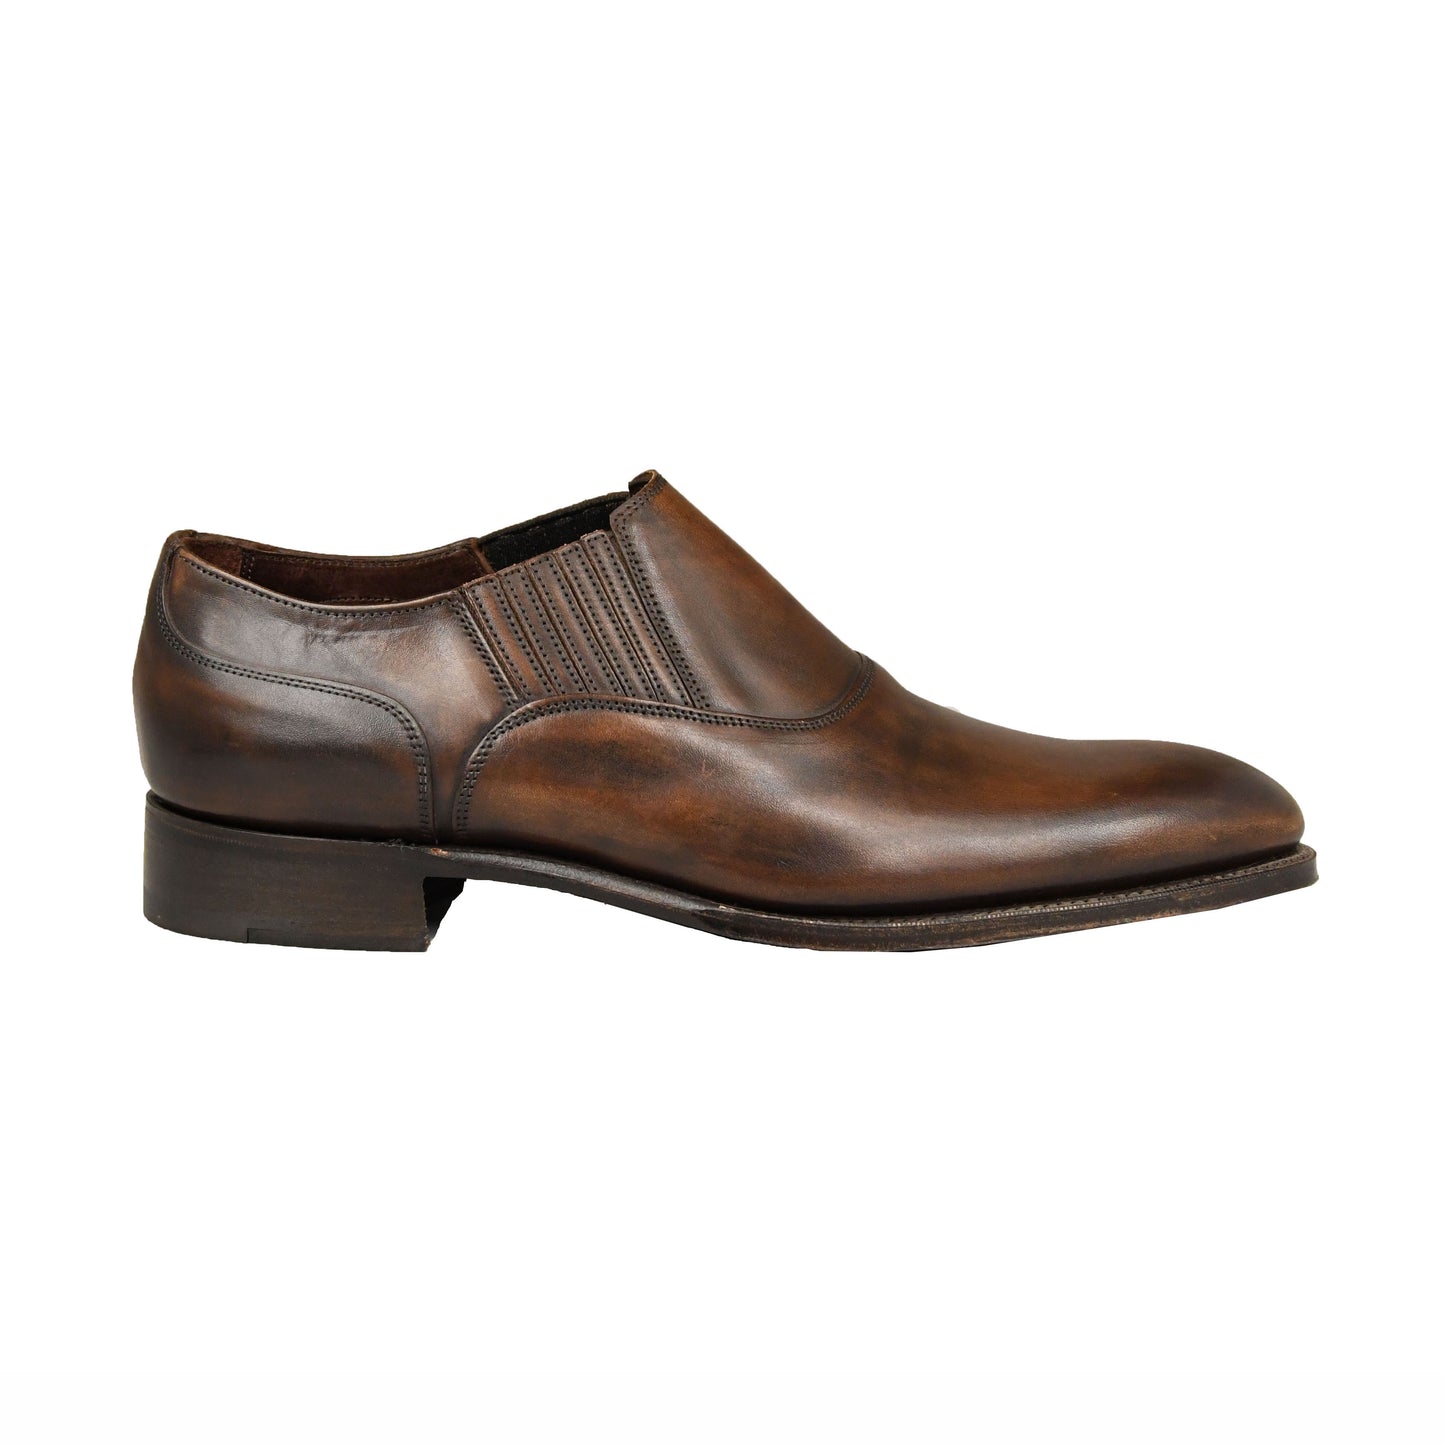 Clarence Bronzed Calf, Joseph Cheaney & Sons